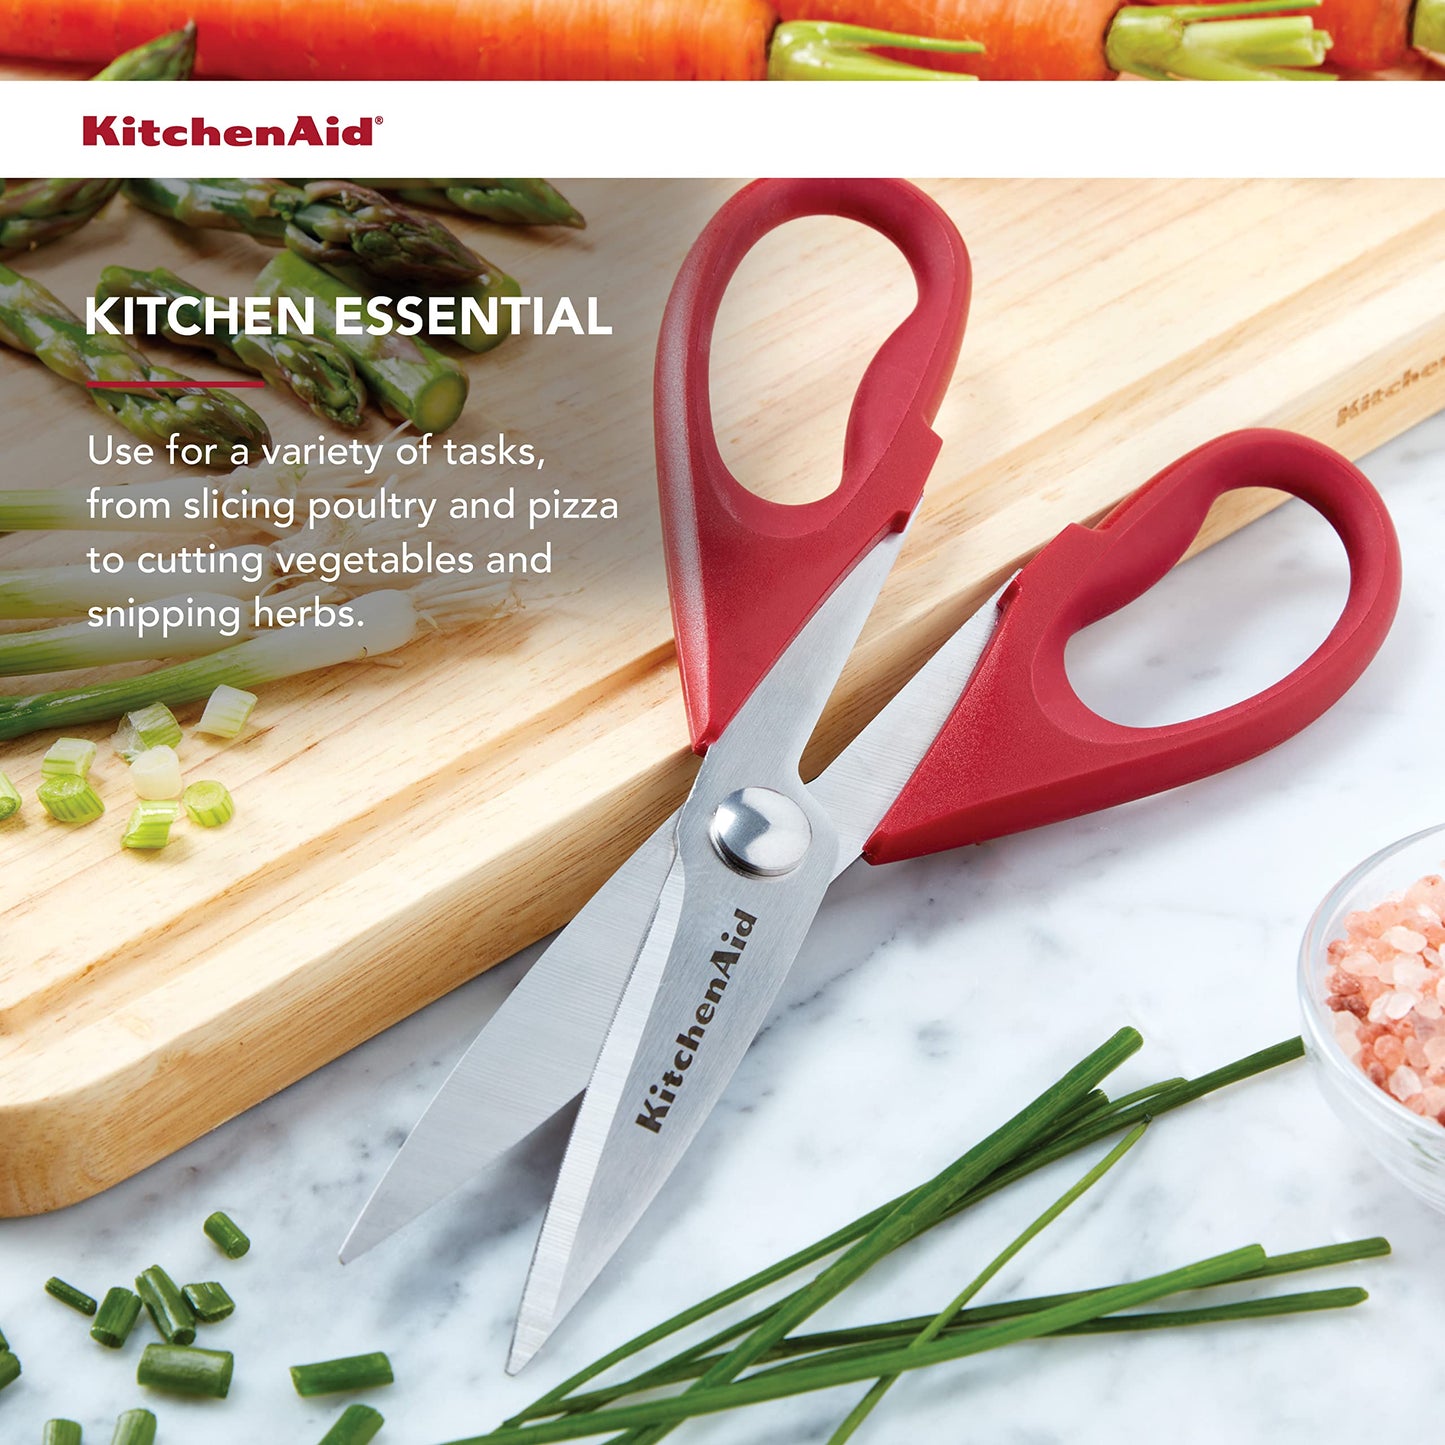 KitchenAid All Purpose Kitchen Shears with Protective Sheath for Everyday use, Dishwasher Safe Stainless Steel Scissors with Comfort Grip, 8.72-Inch, Black